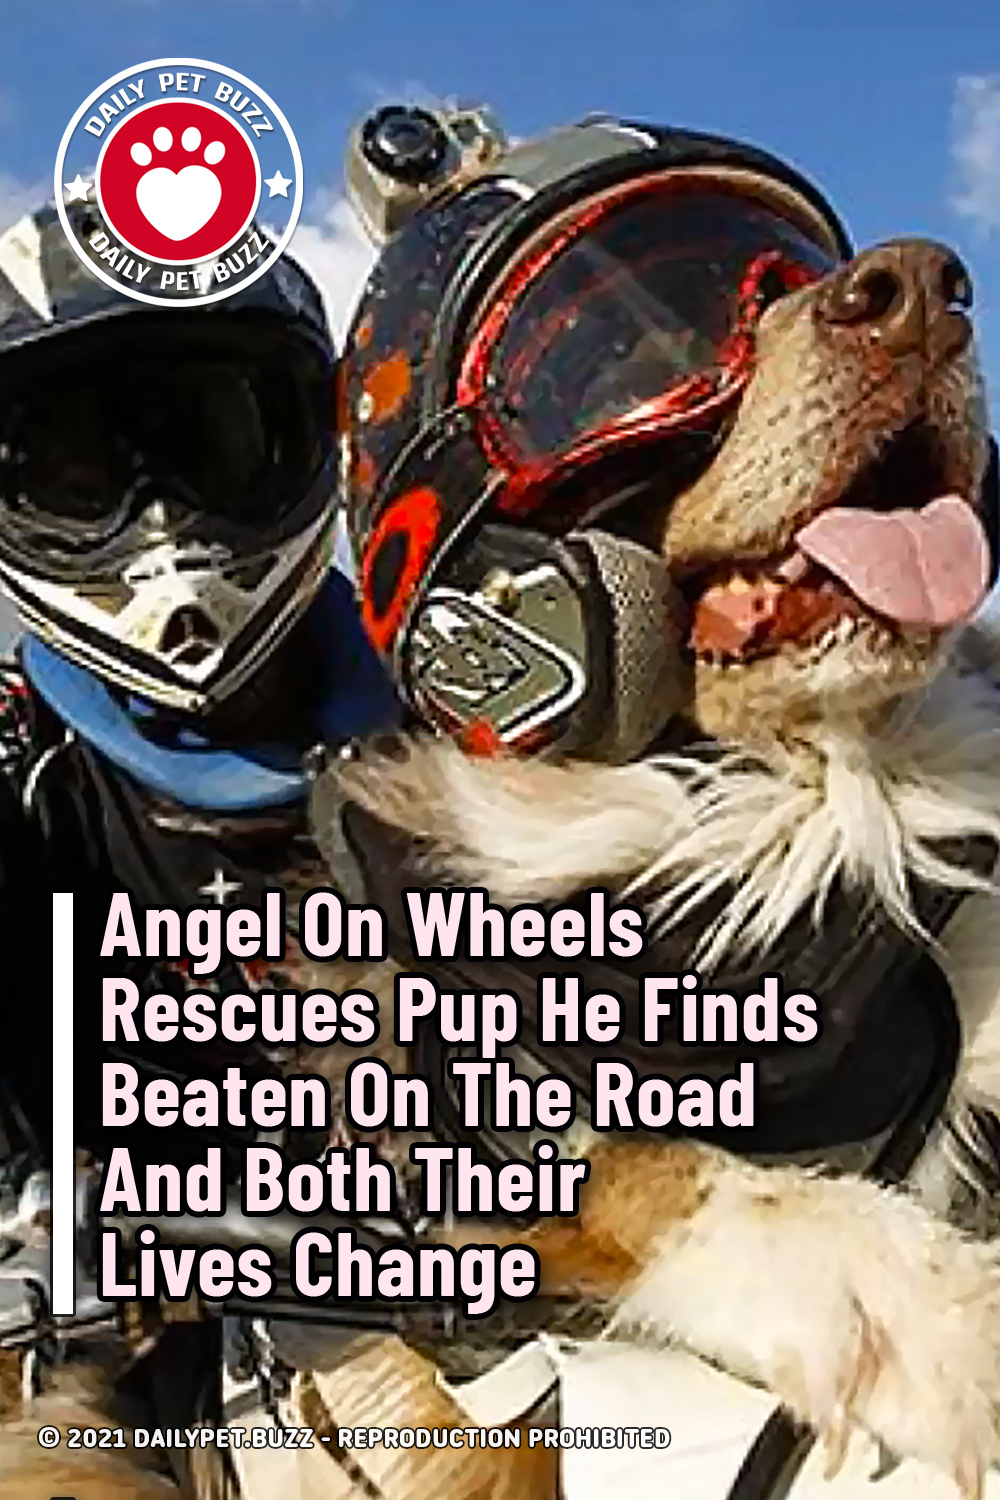 Angel On Wheels Rescues Pup He Finds Beaten On The Road And Both Their Lives Change